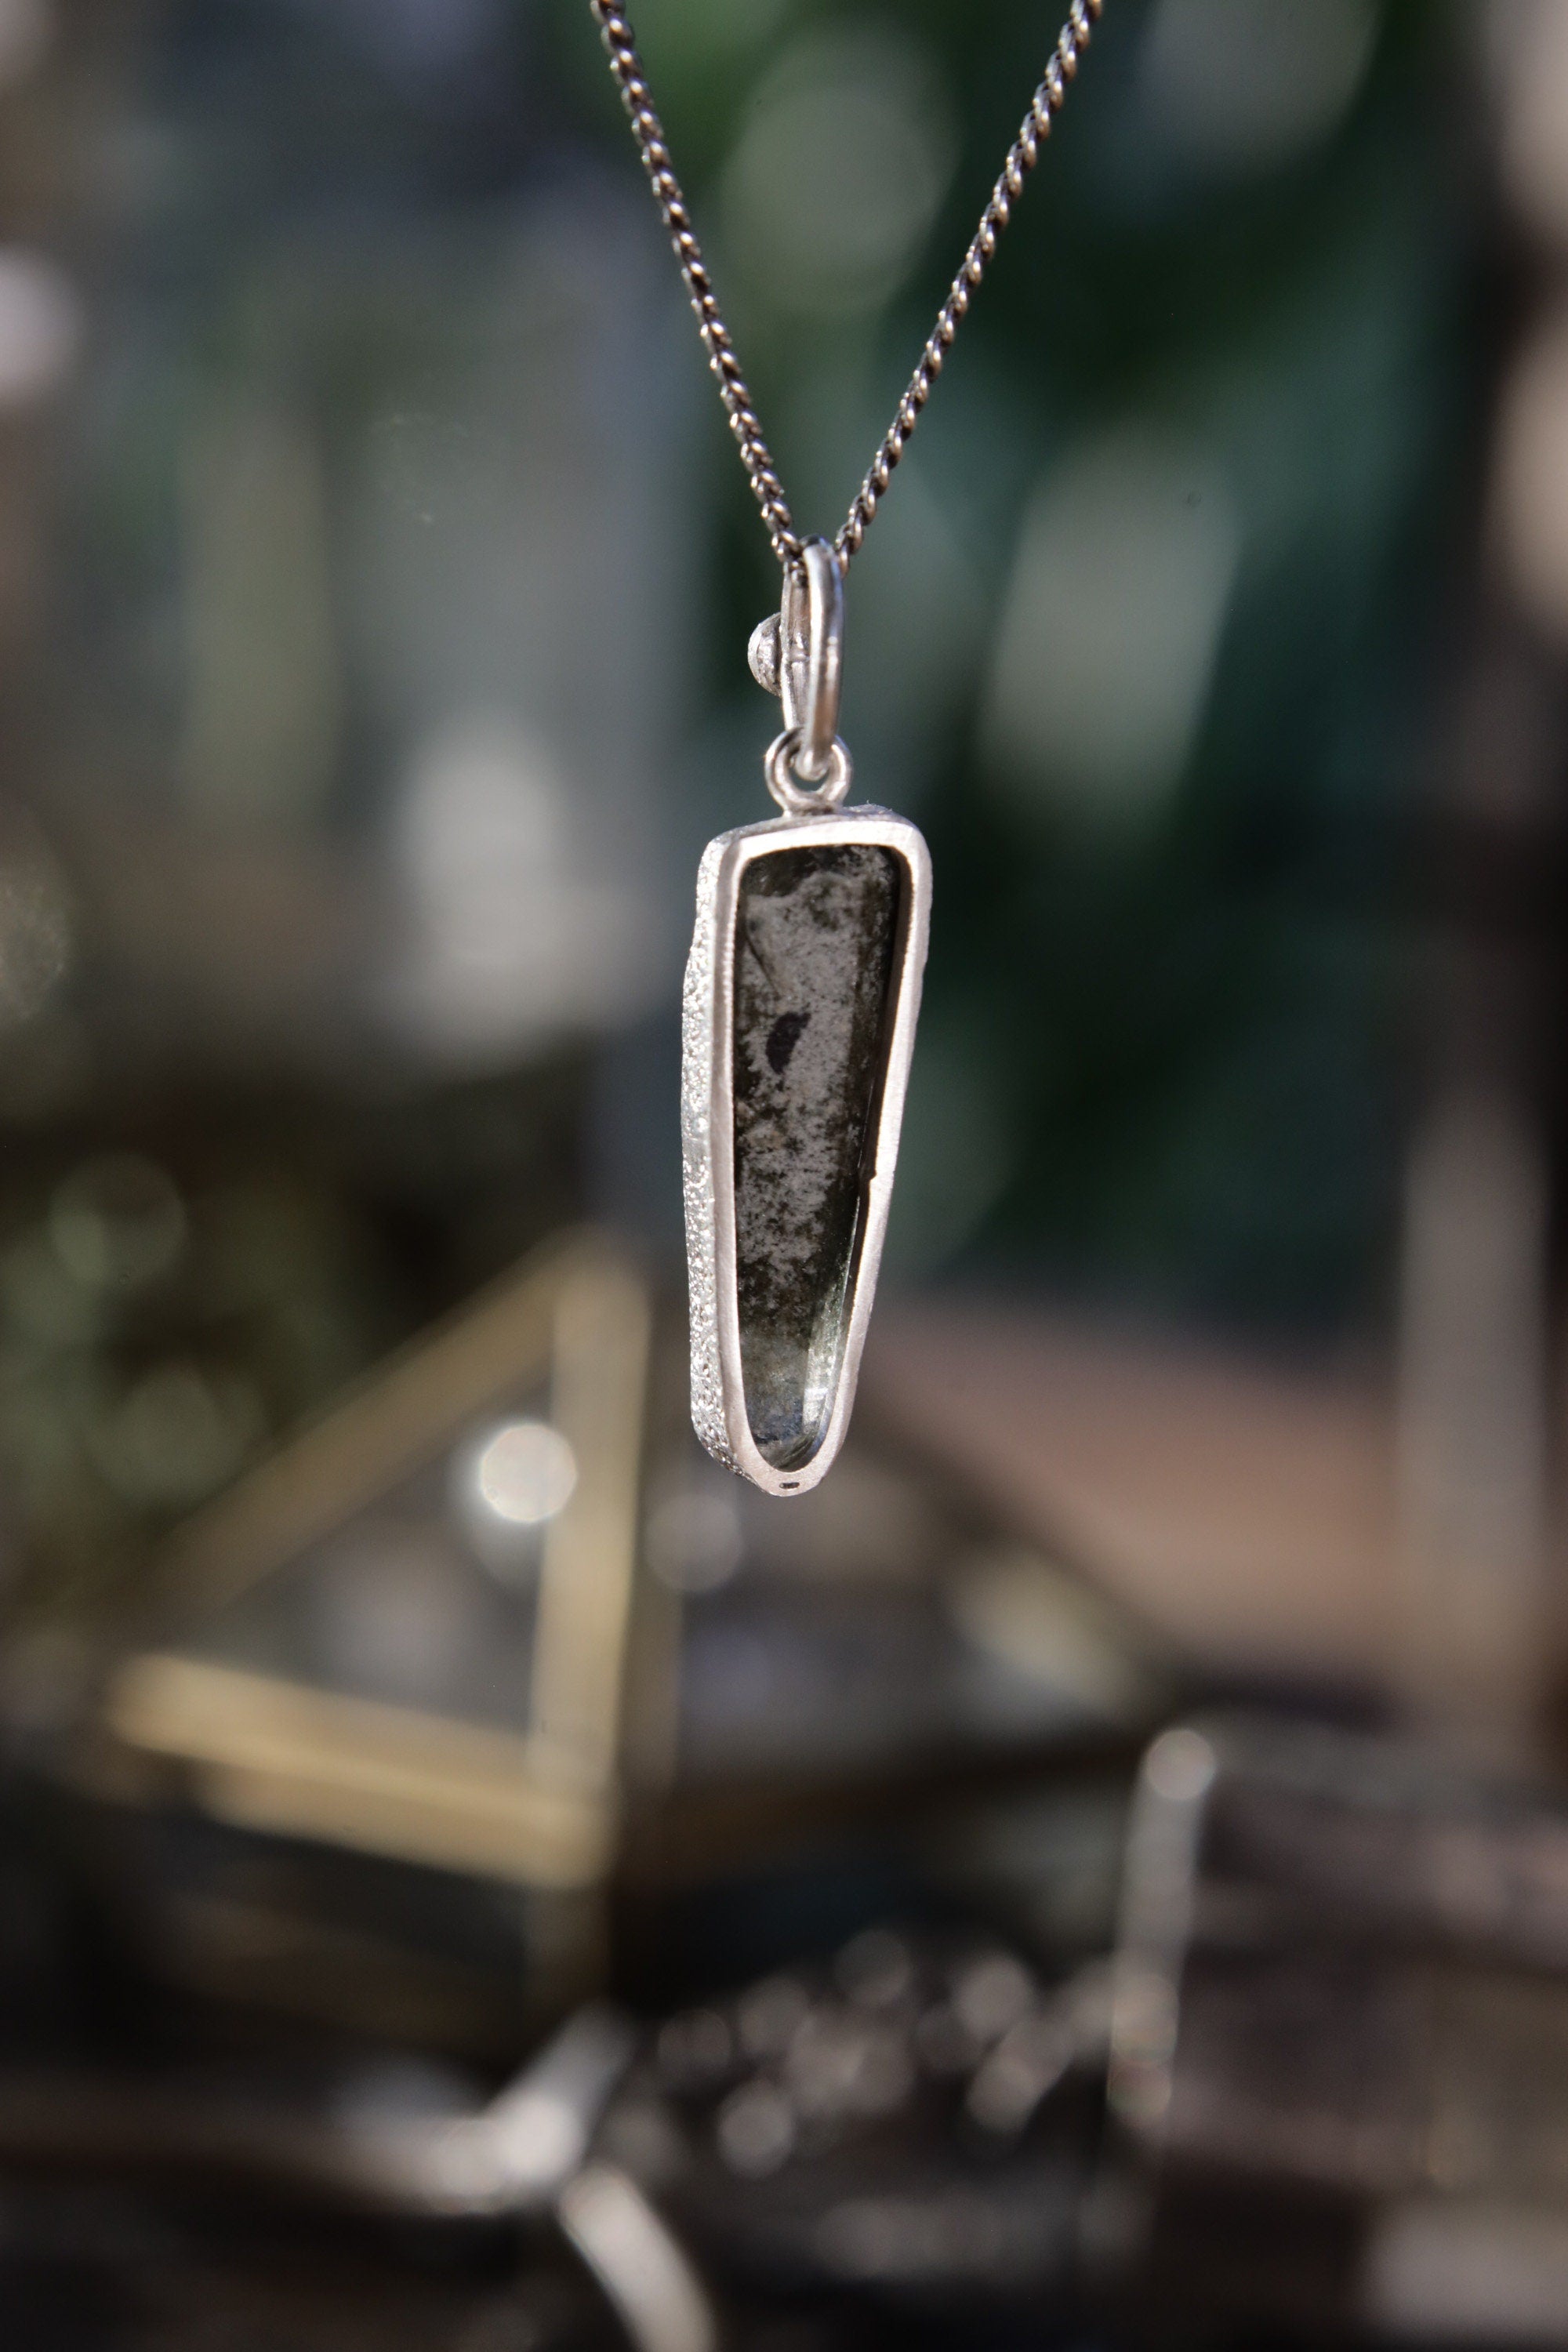 Luminous Peak: Sterling Silver Pendant with Himalayan Chlorite Quartz and Opal - High Shine & Sand Textured - NO/05